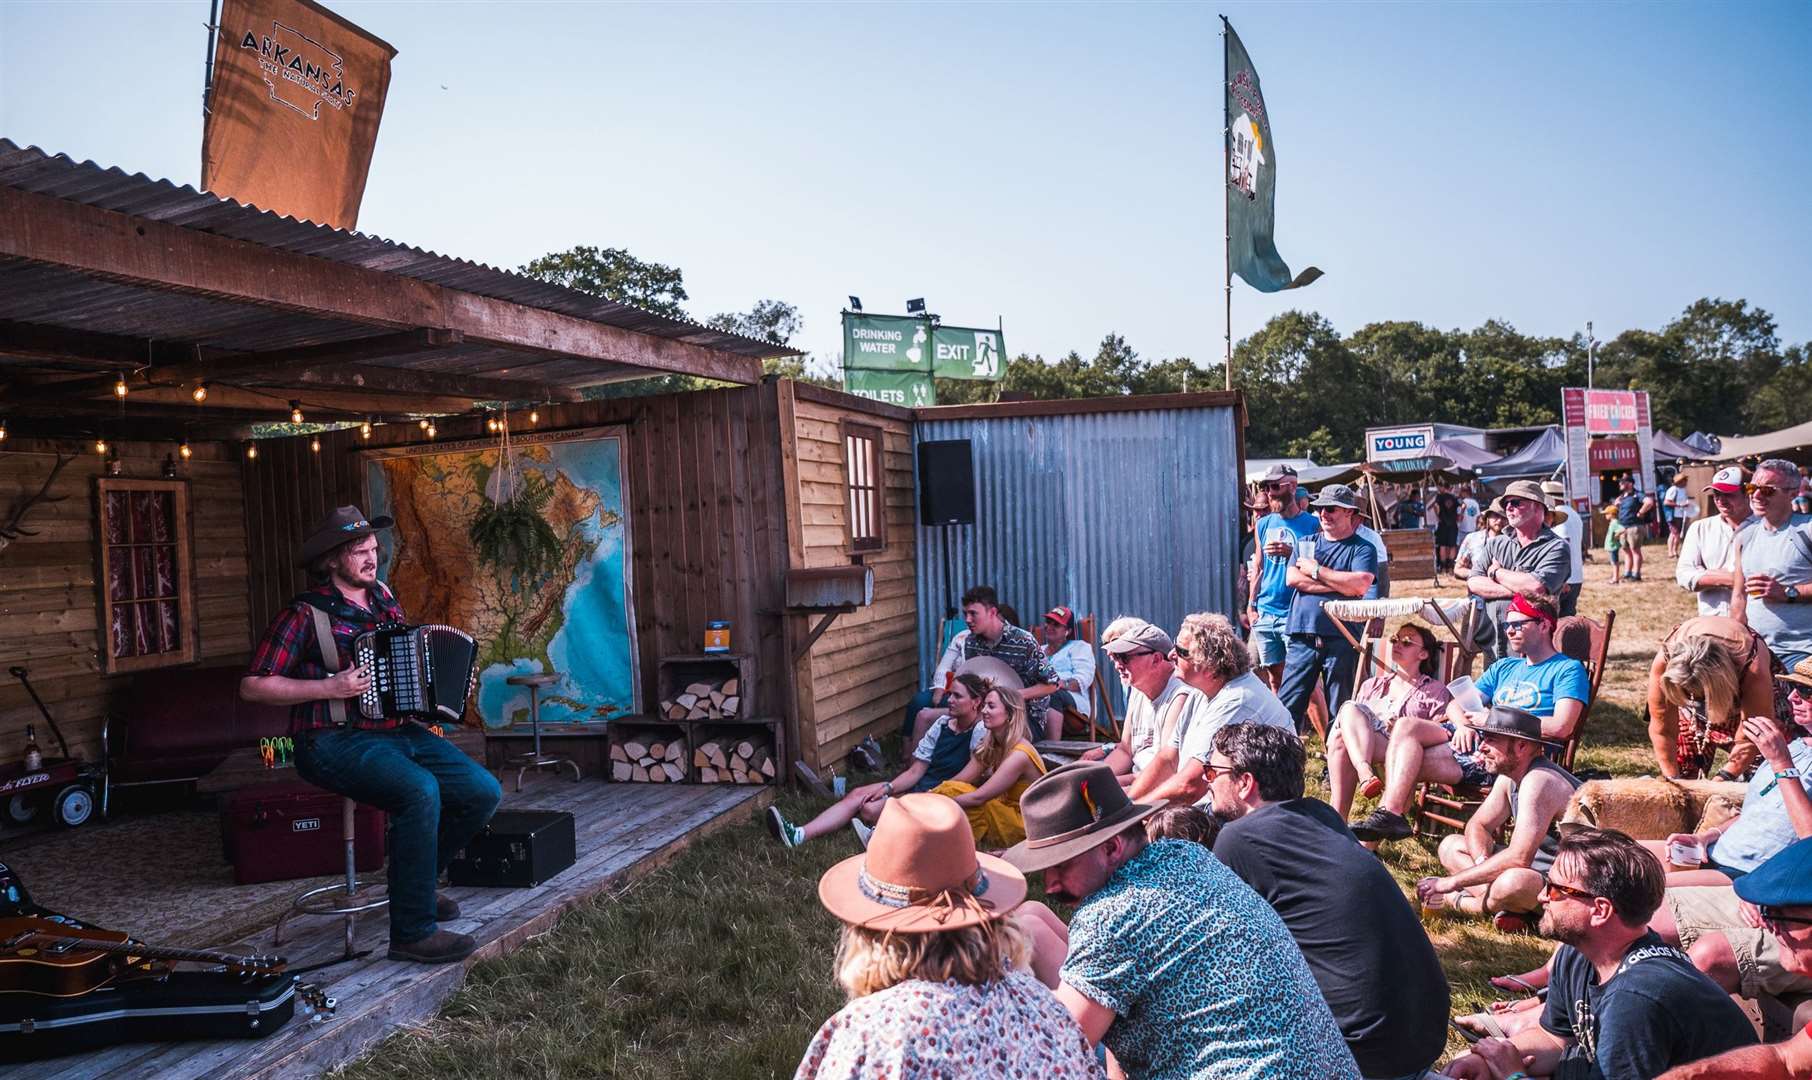 There will be stage takeovers by the likes of SupaJam, Under the Apple Tree and Western AF this year. Picture: Caitlin Mogridge